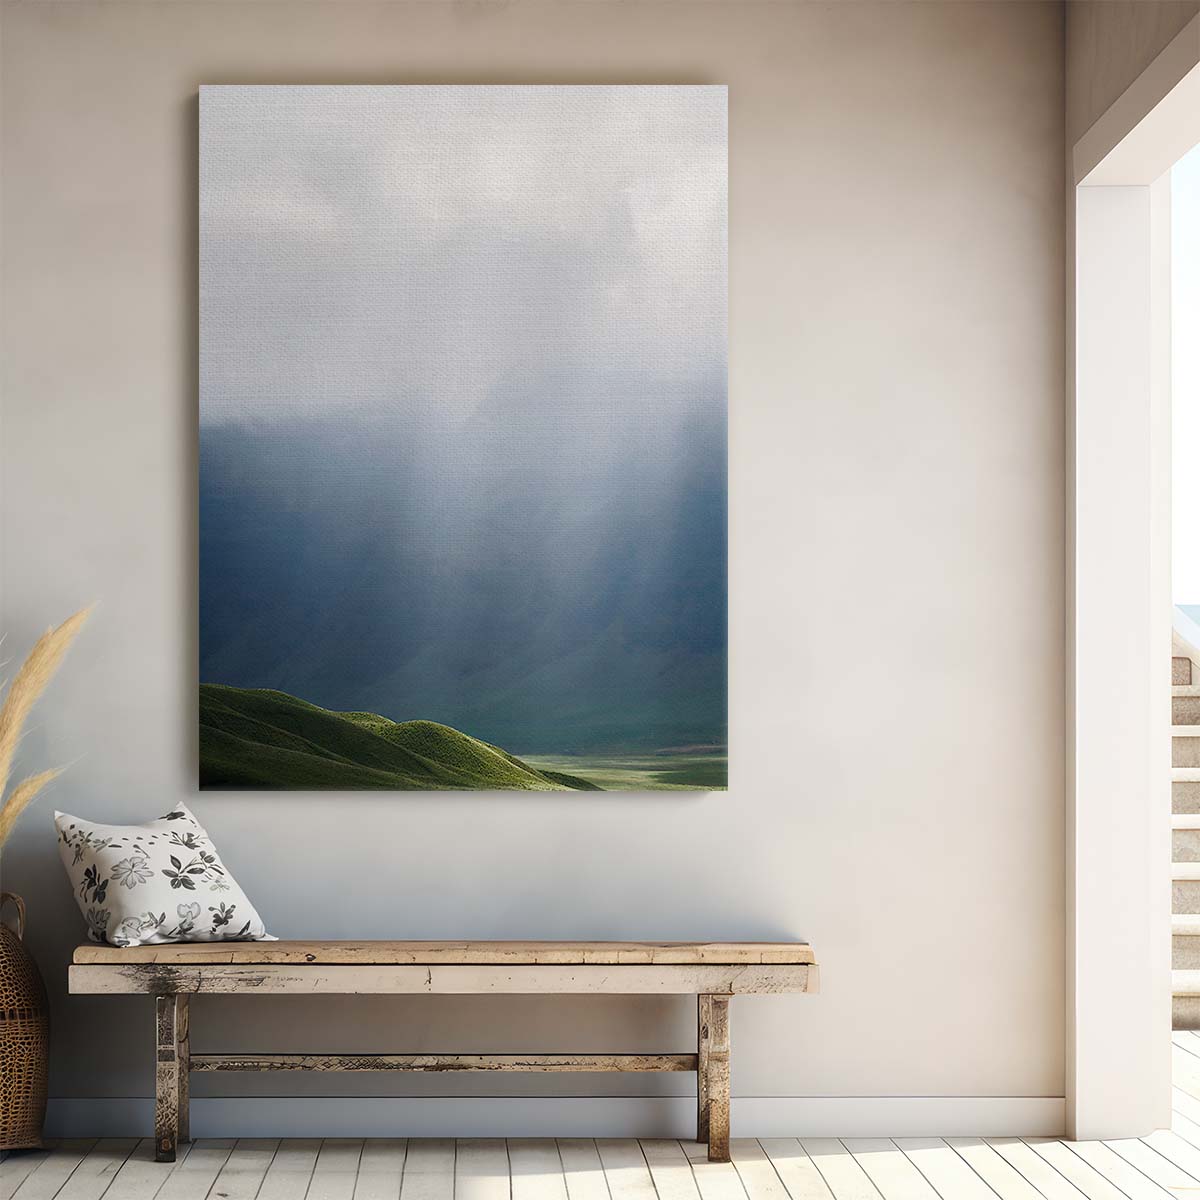 Indonesian Mountain Ridge Photography Foggy Landscape with Sunlit Rocks by Luxuriance Designs, made in USA